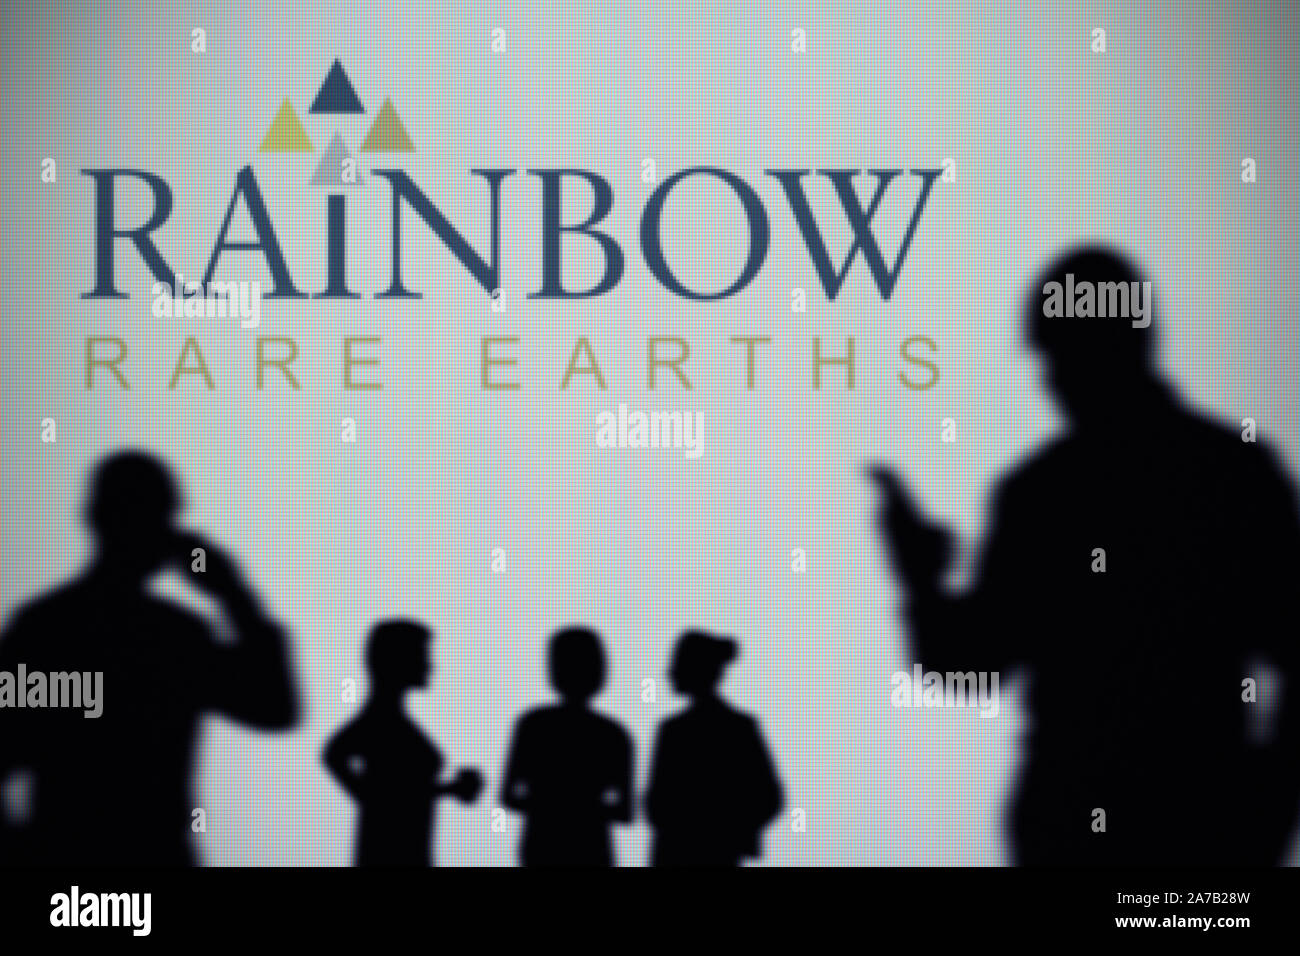 The Rainbow Rare Earths logo is seen on an LED screen in the background while a silhouetted person uses a smartphone (Editorial use only) Stock Photo